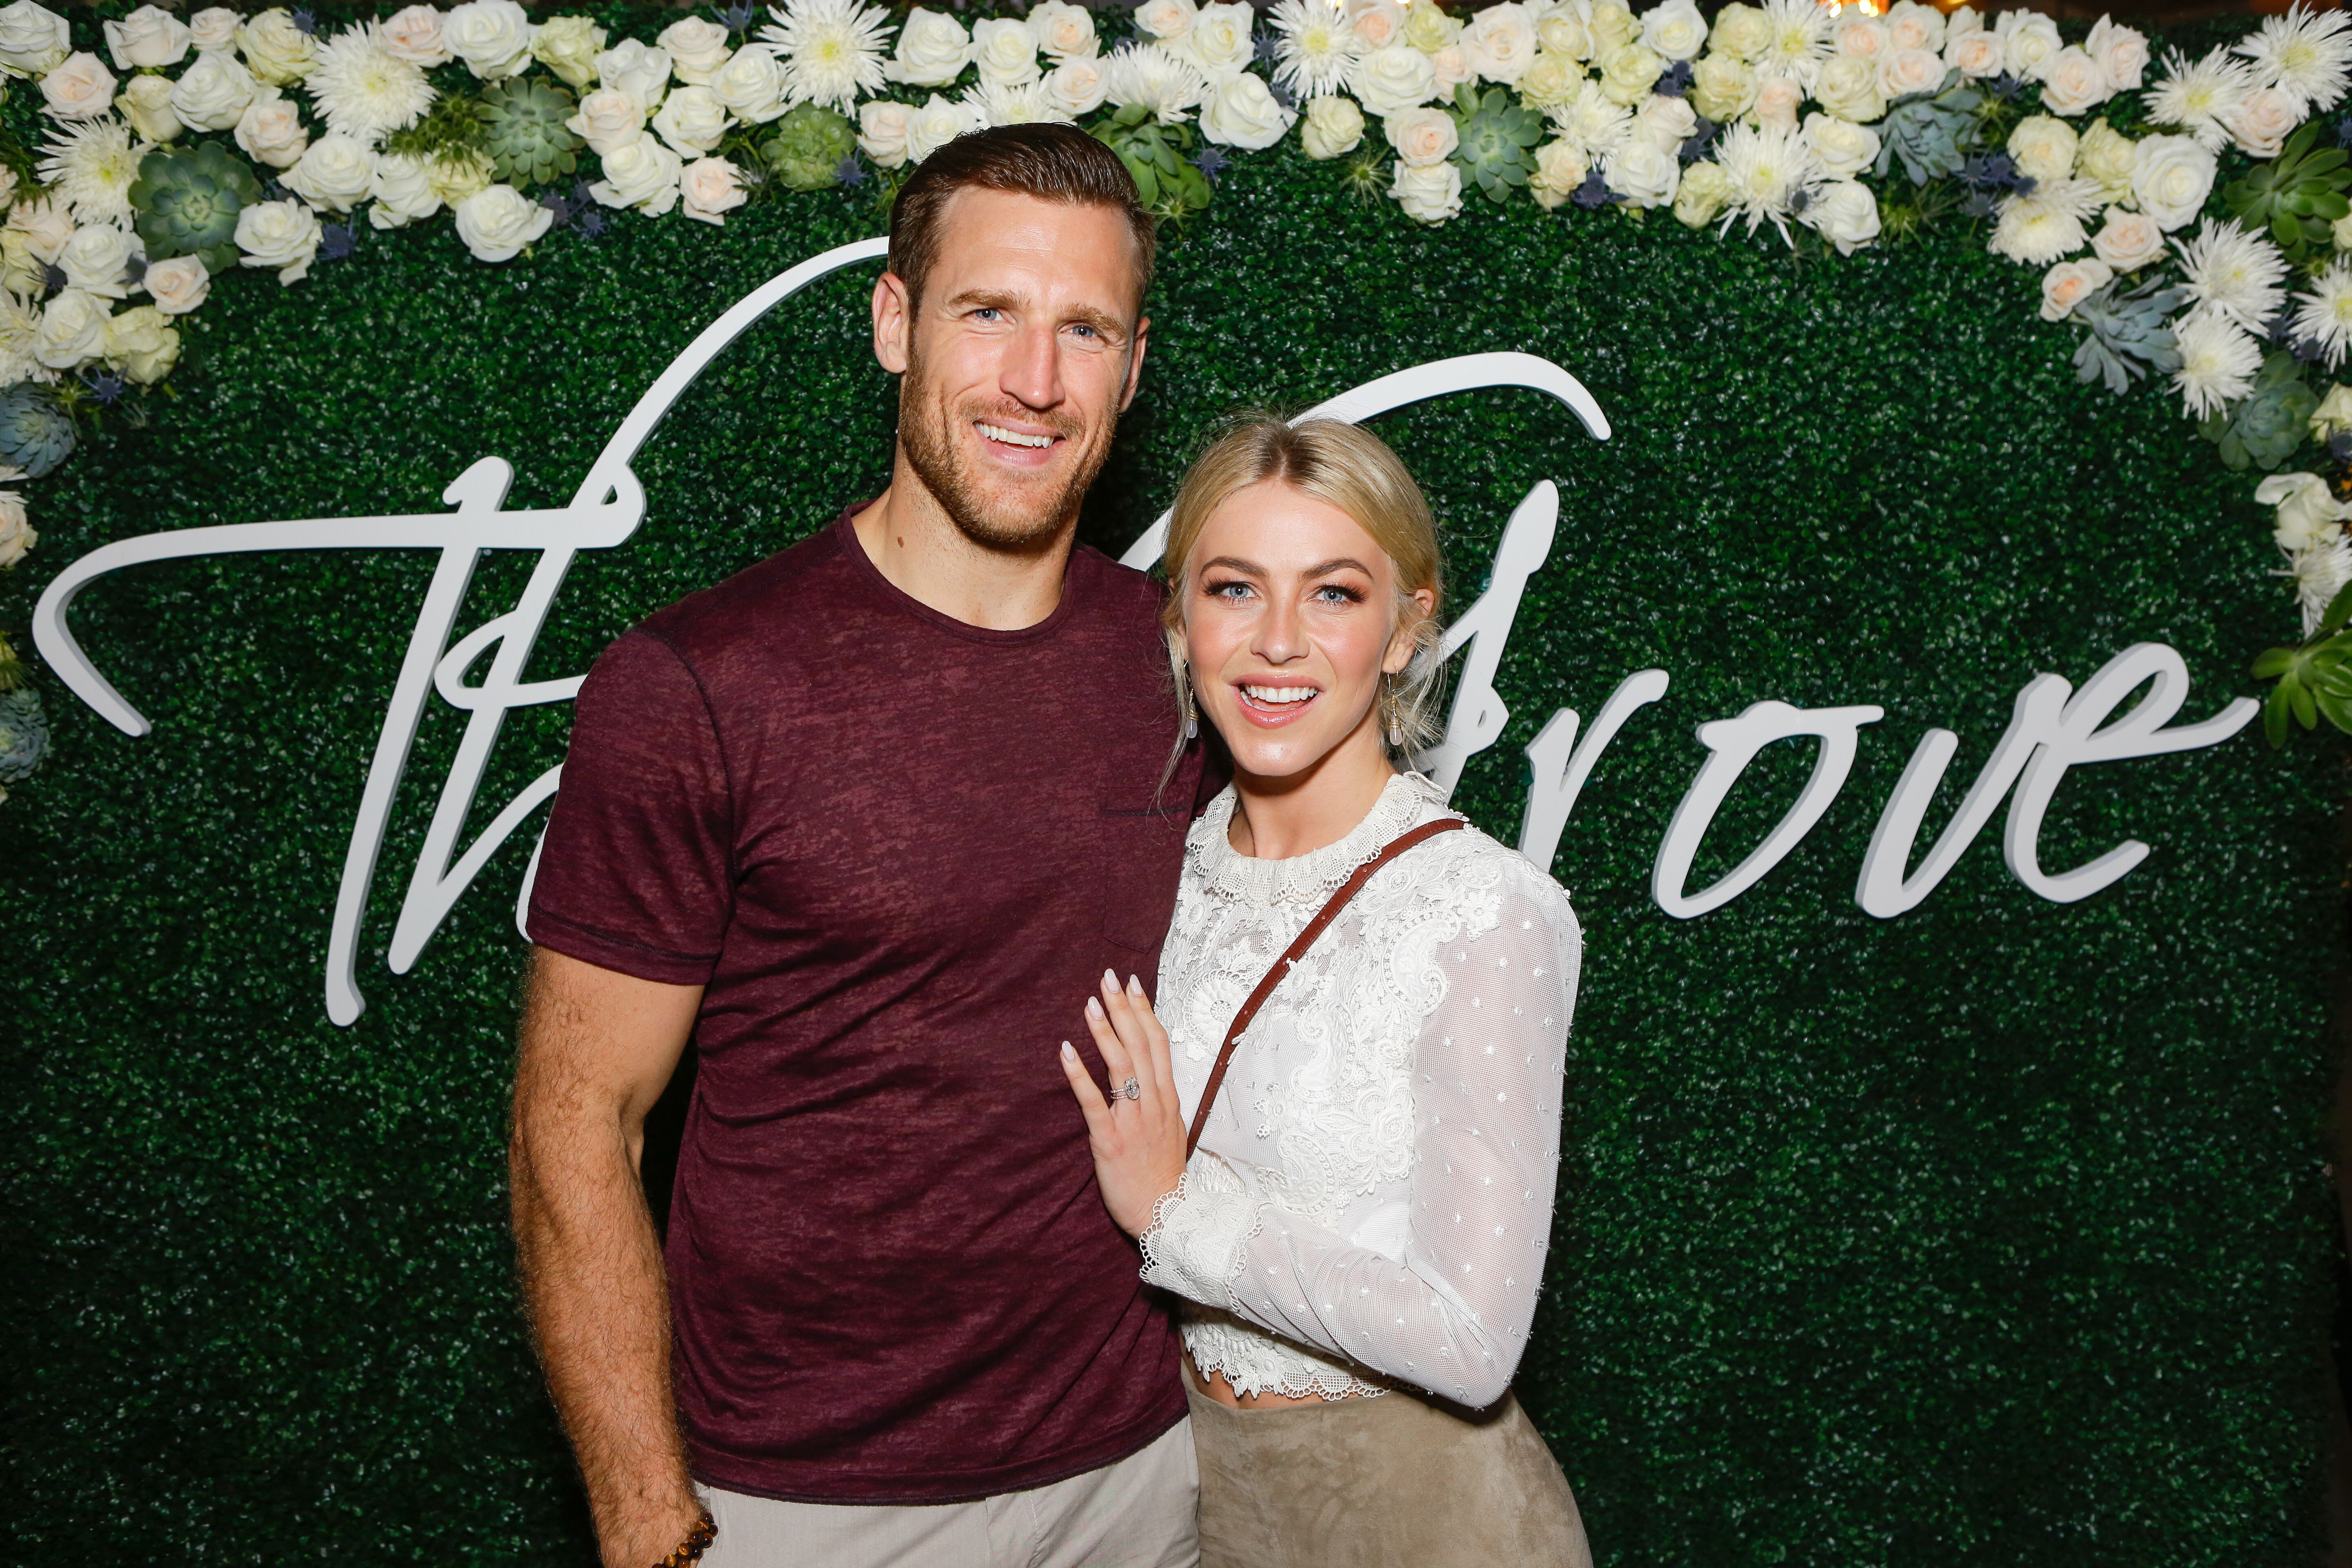 Brooks Laich and Julianne Hough at the Paint & Sip & Help event on October 12, 2017. | Photo: Getty Images